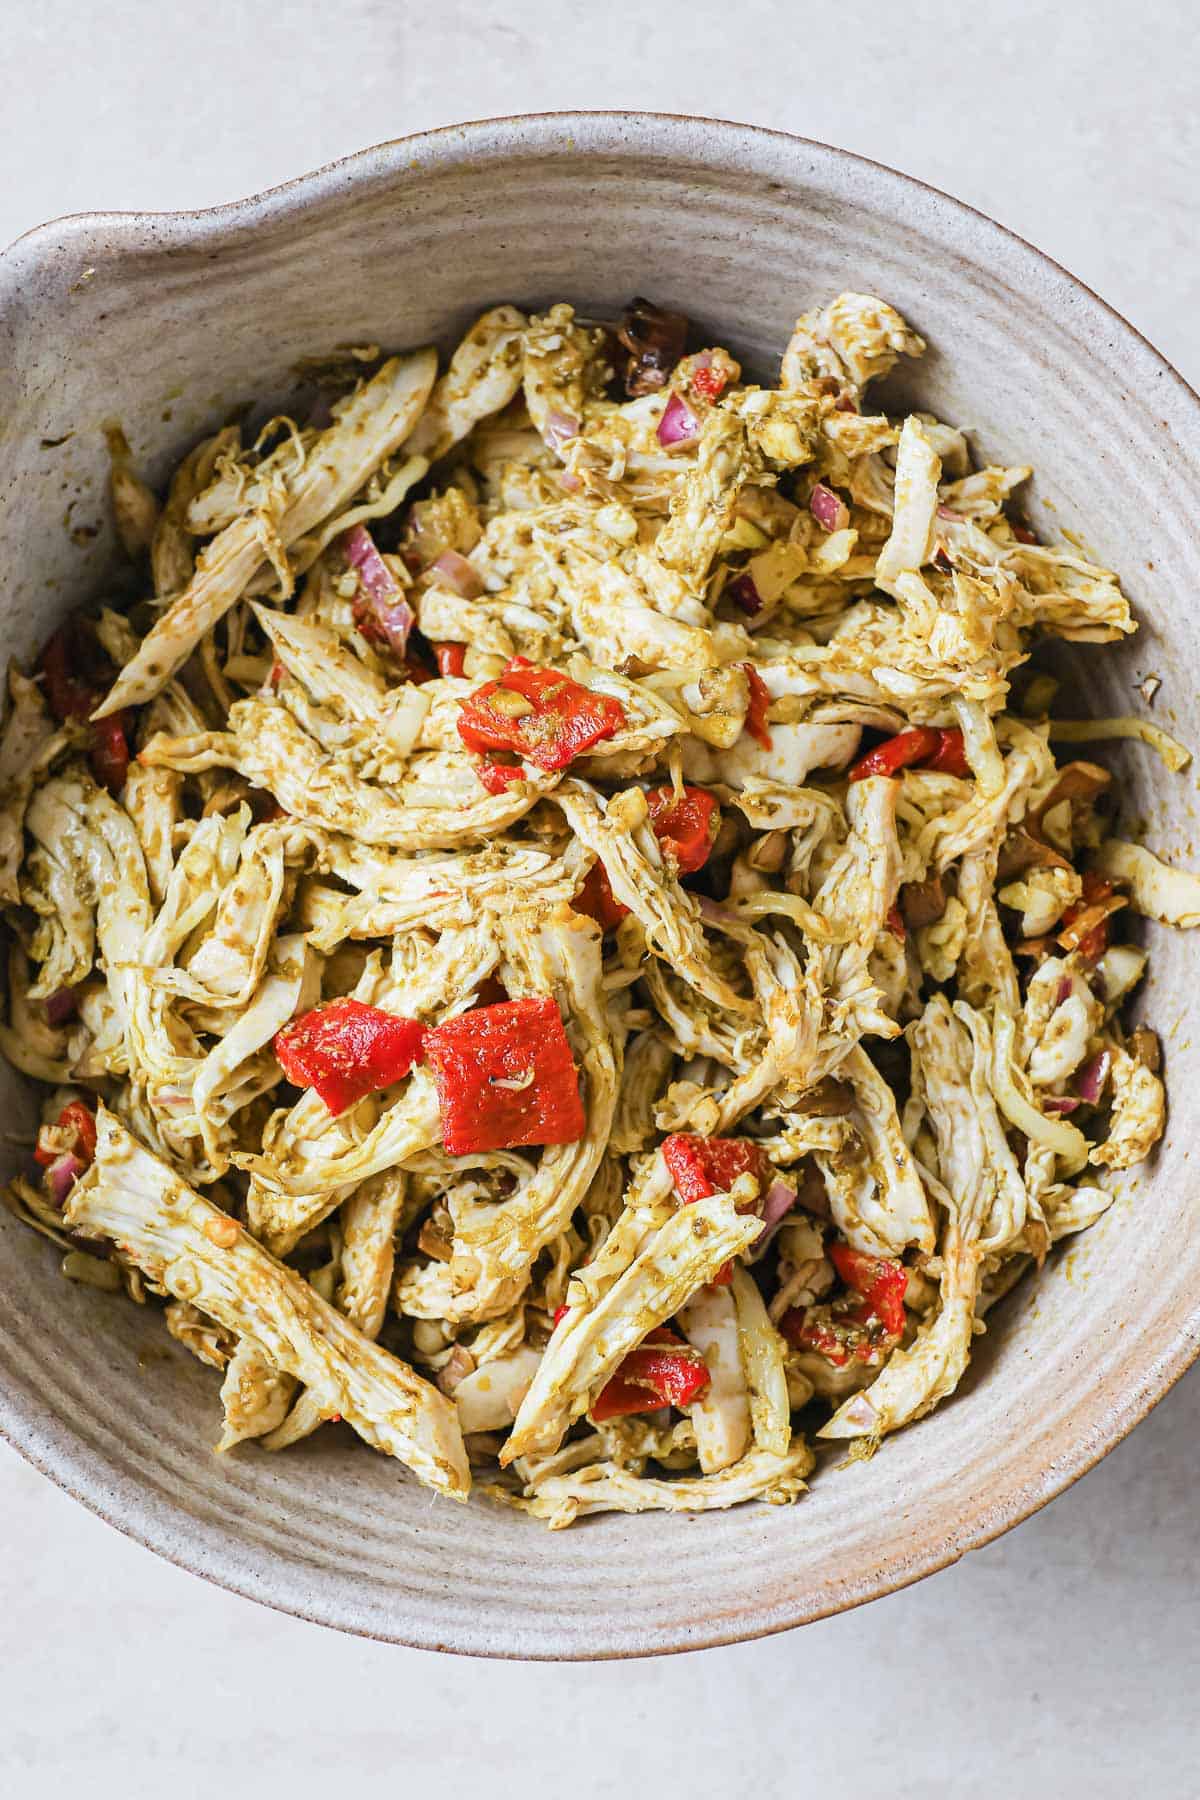 A mixing bowl filled with shredded chicken, tossed in pesto, with roasted red peppers and red onions.